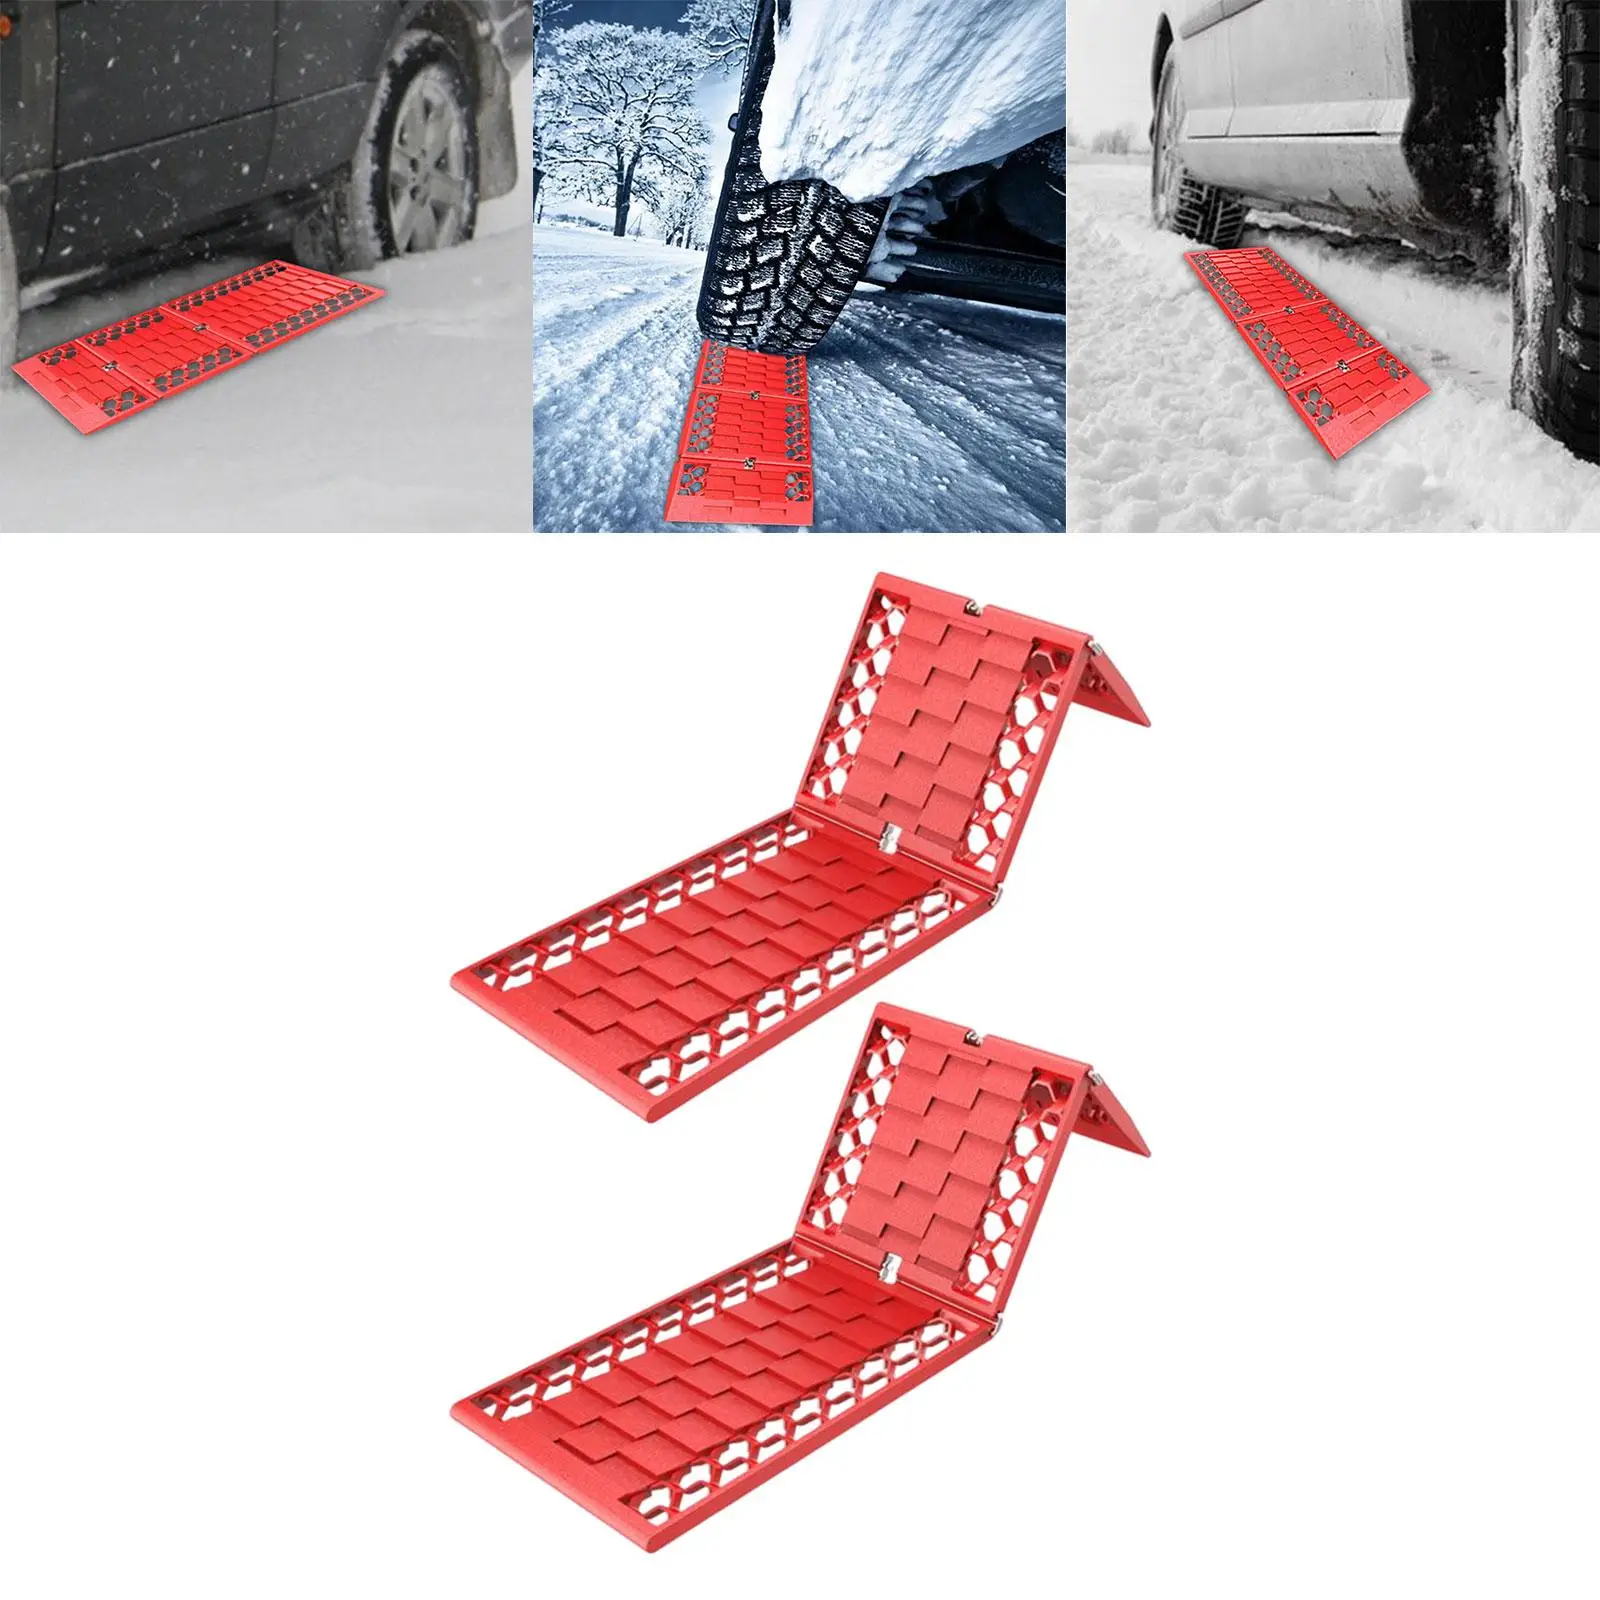 2Pcs off roading traction track Nonslip Plate Snow Escape Devices for Ice